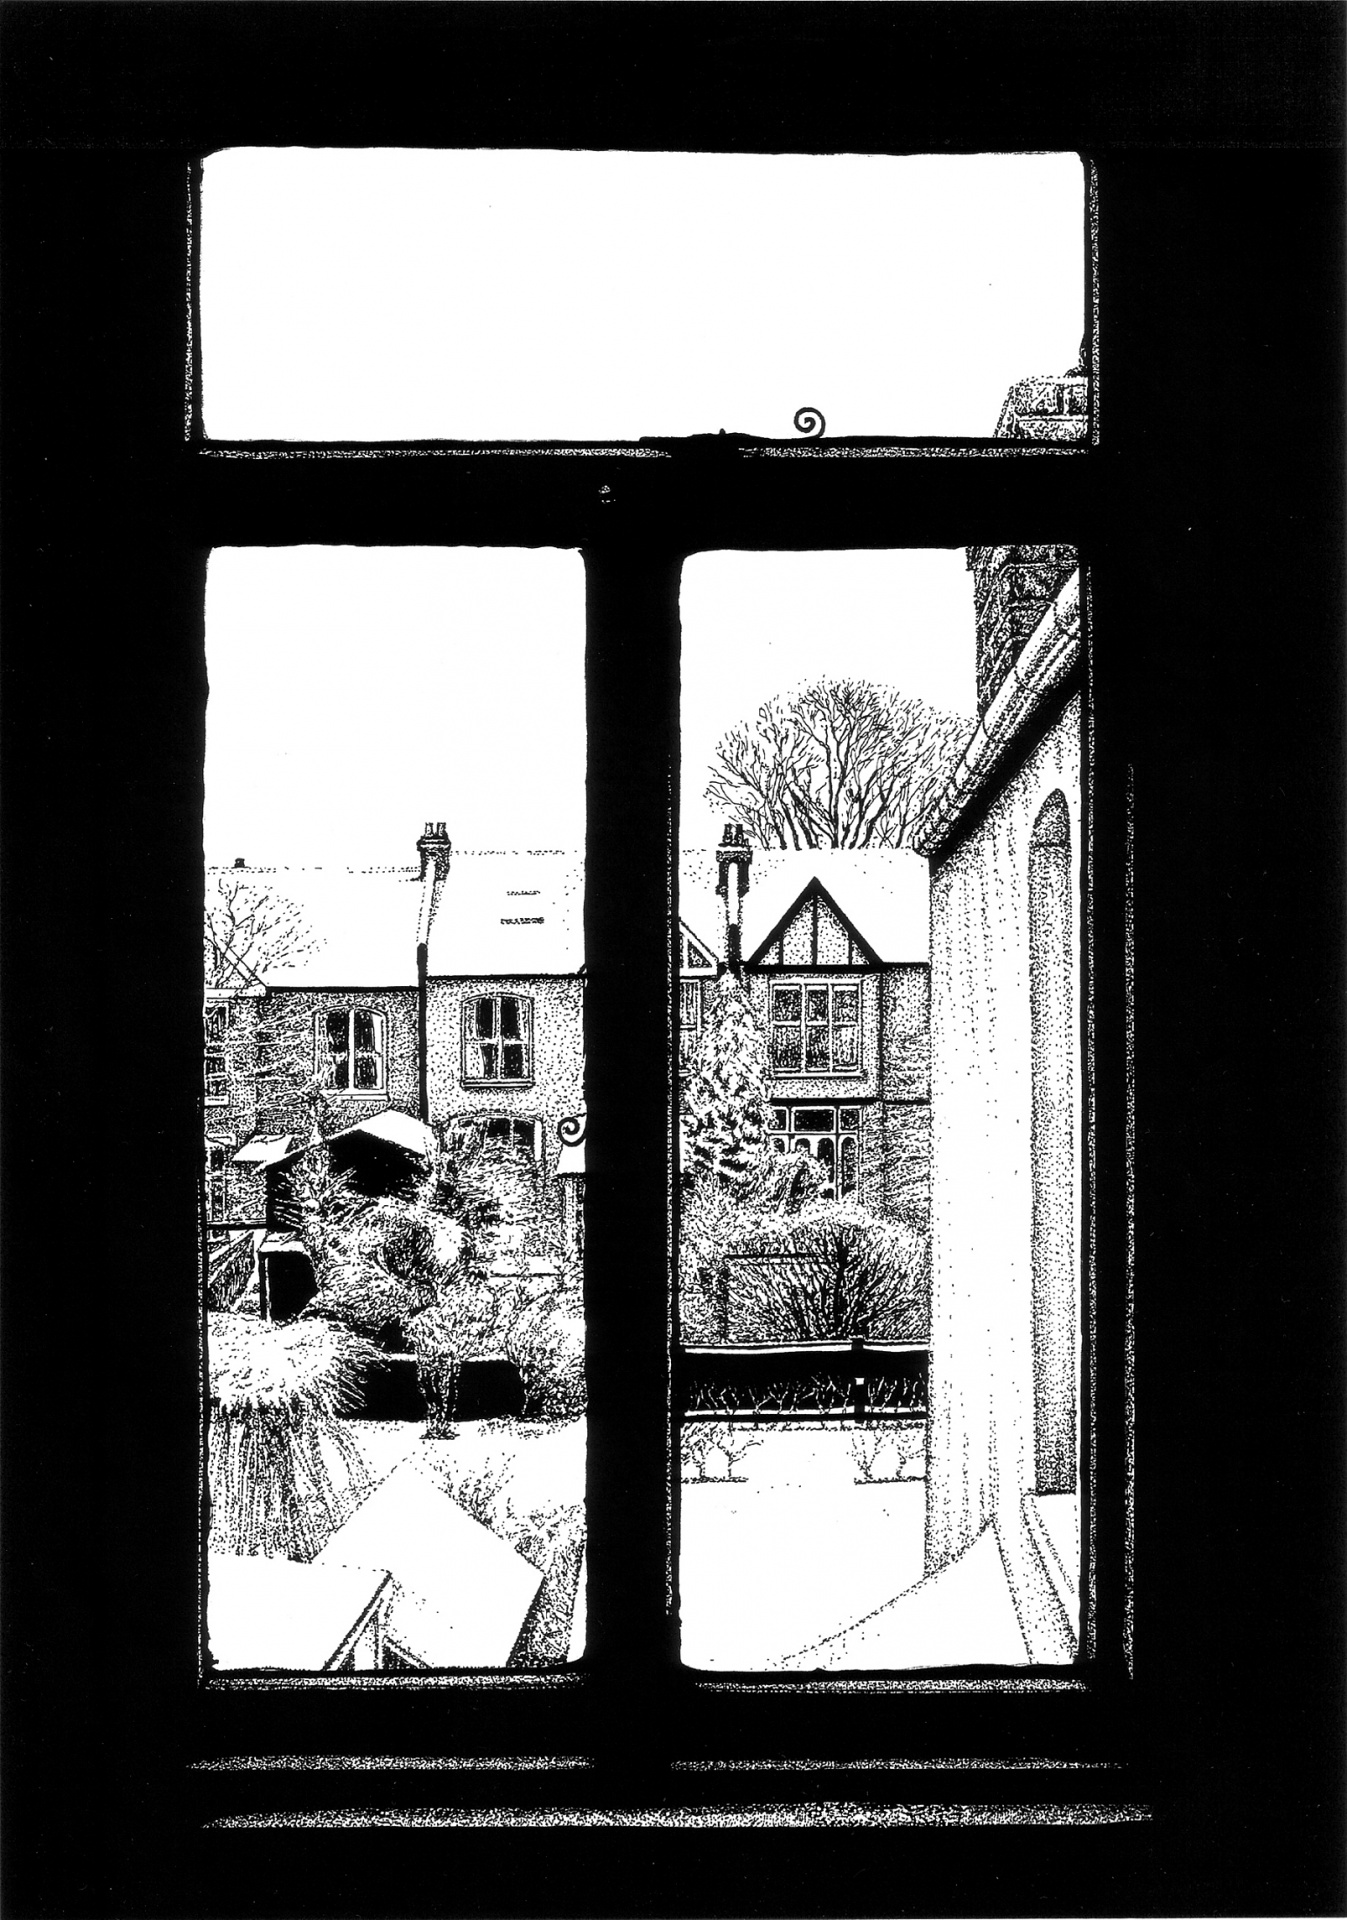 View from house in the London suburb of Streatham, during a cold winter